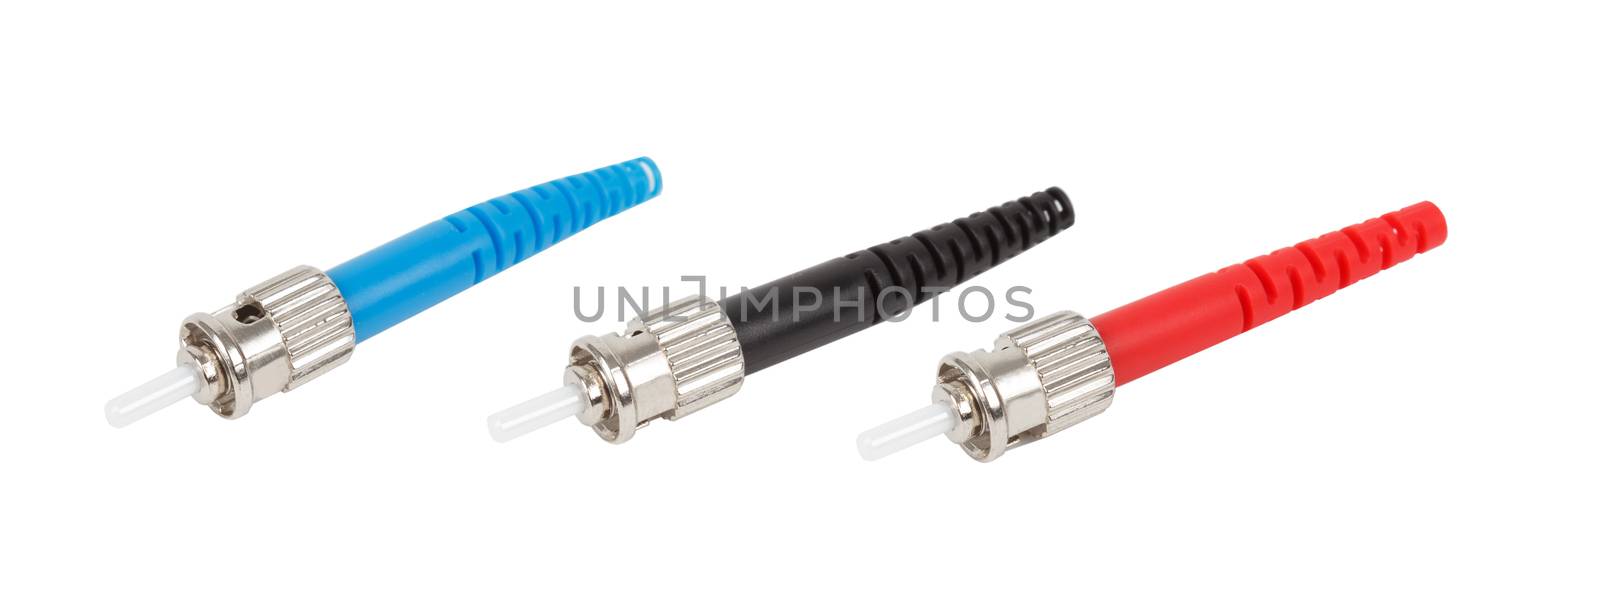 fiber optic connectors, ST  type, singlemode and multimode isolated on white background